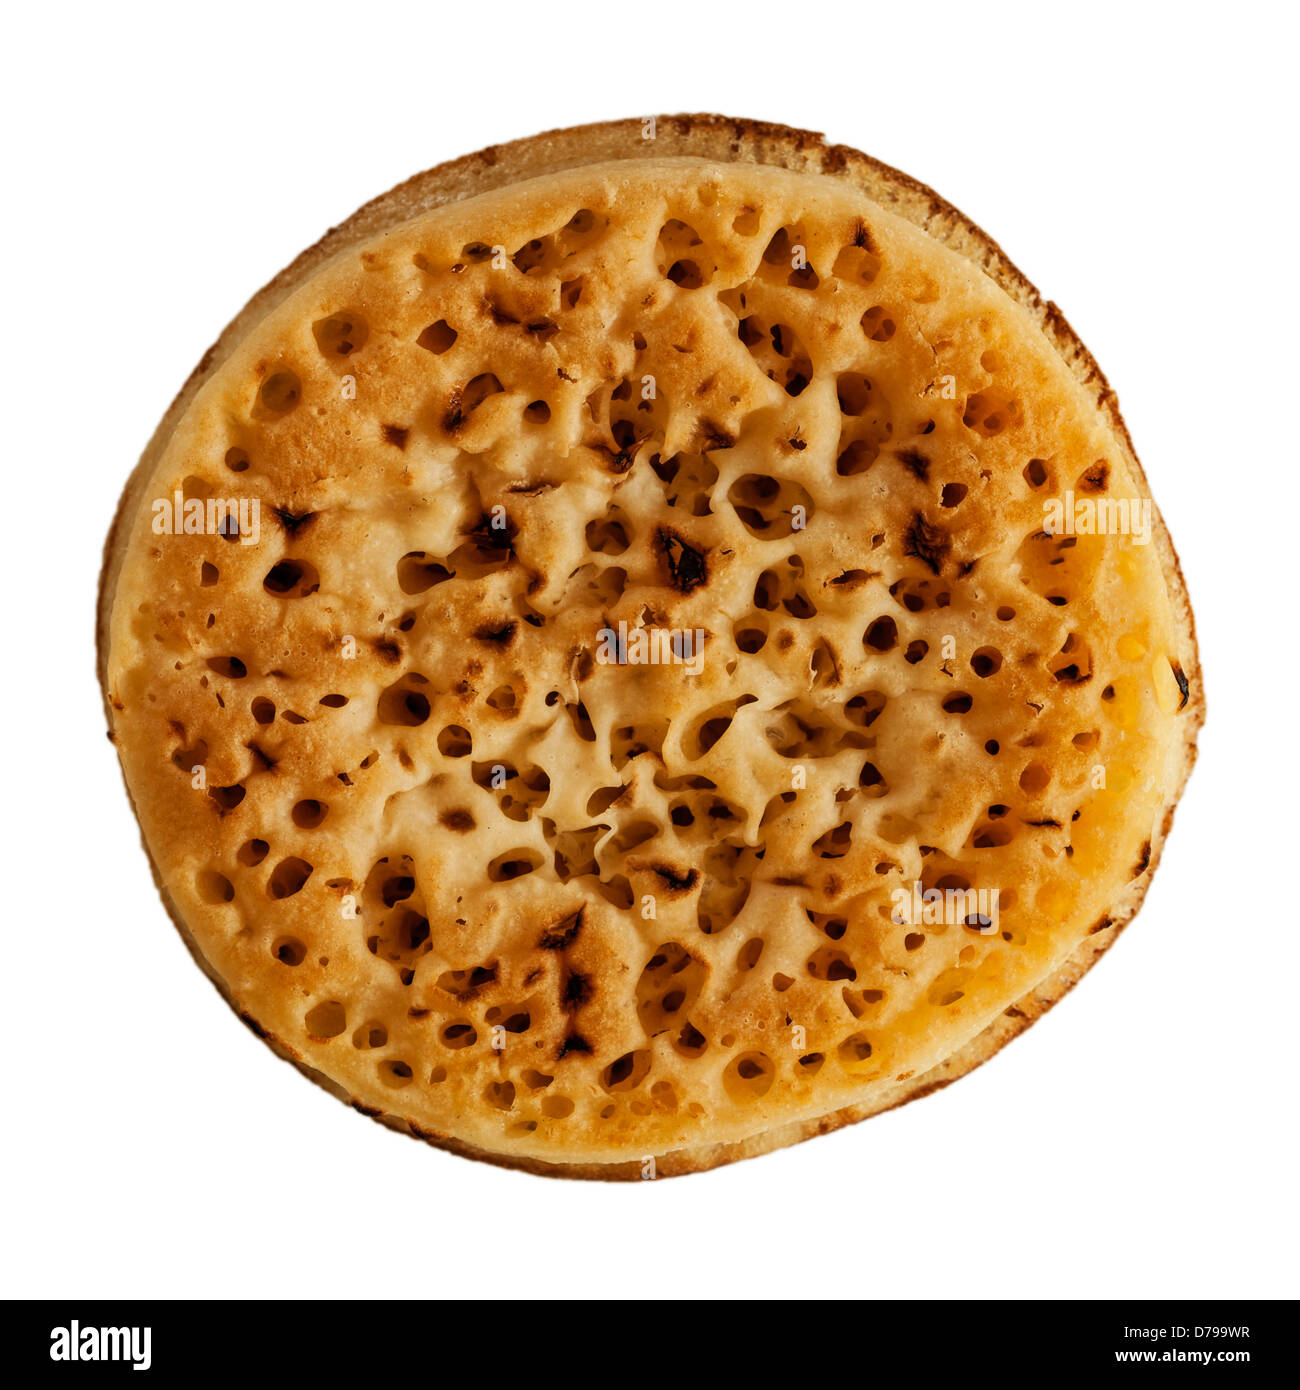 A crumpet on a white background Stock Photo